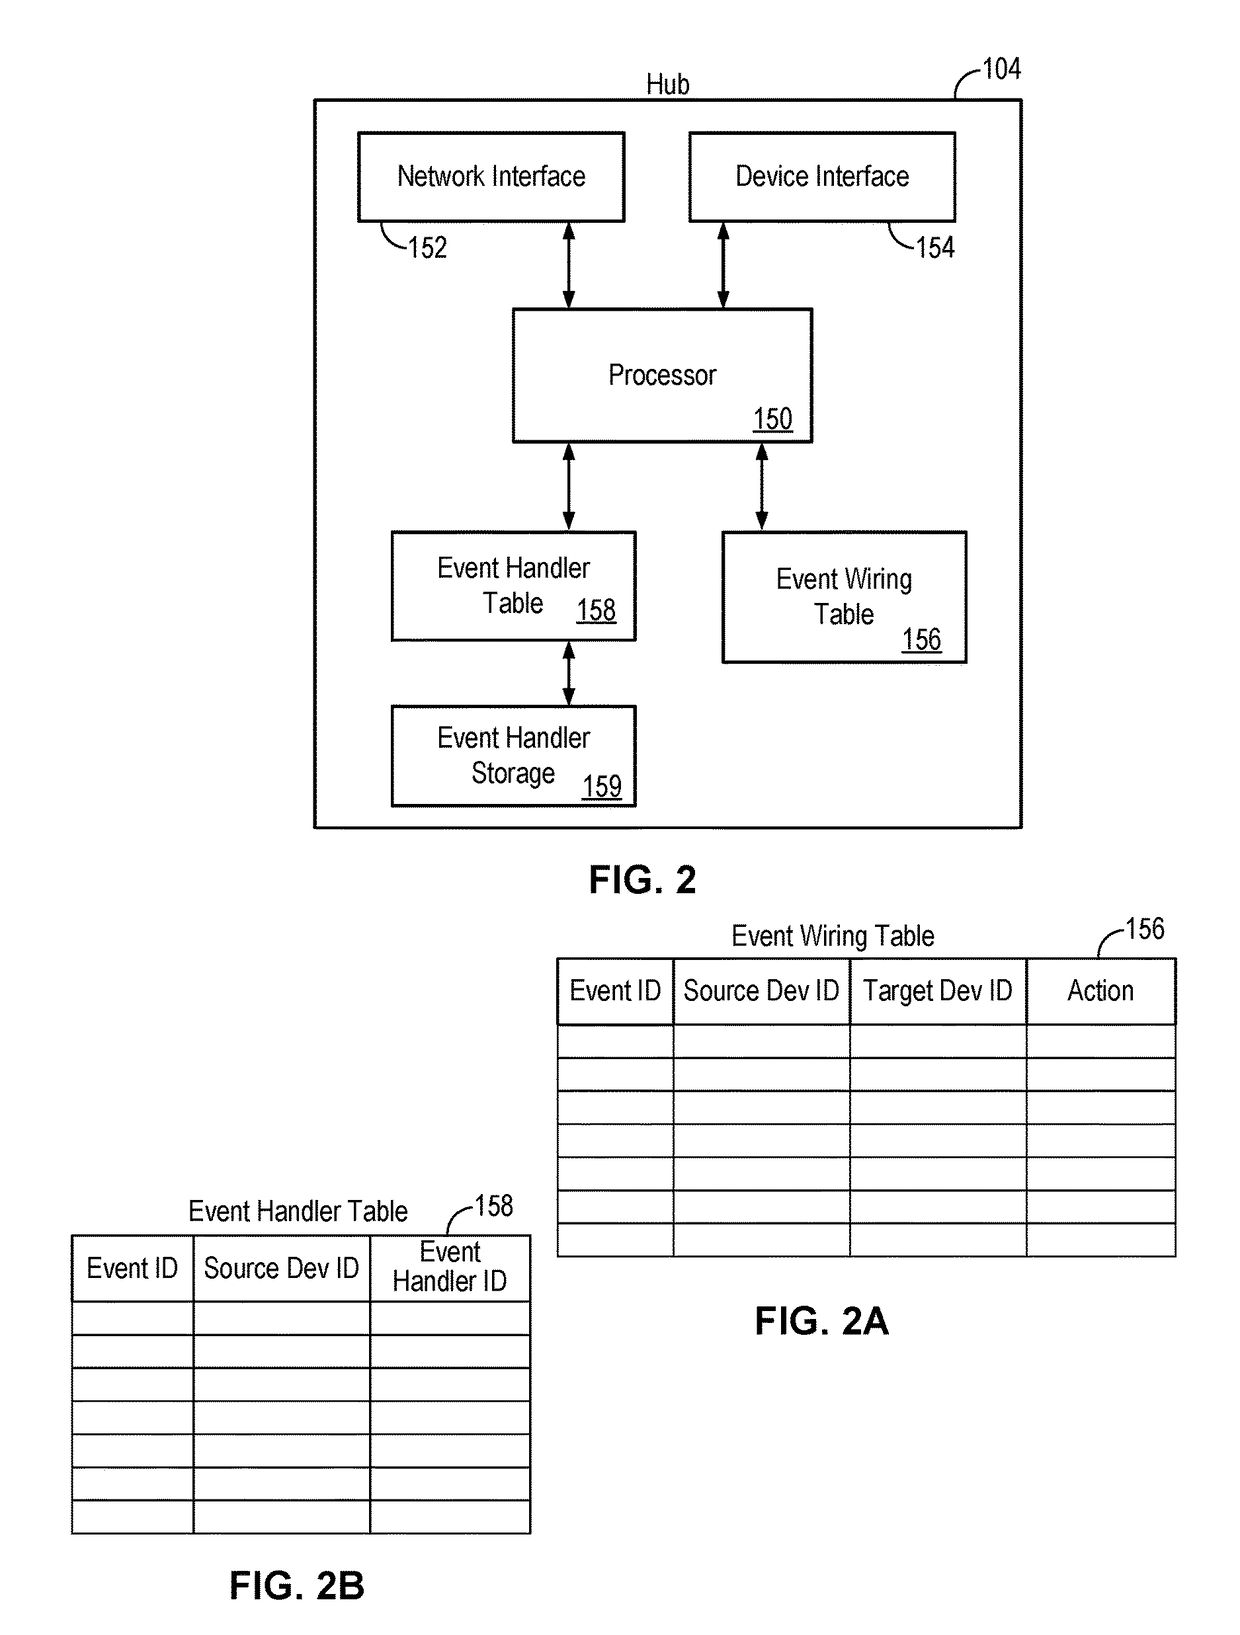 Secured device access in a device automation system